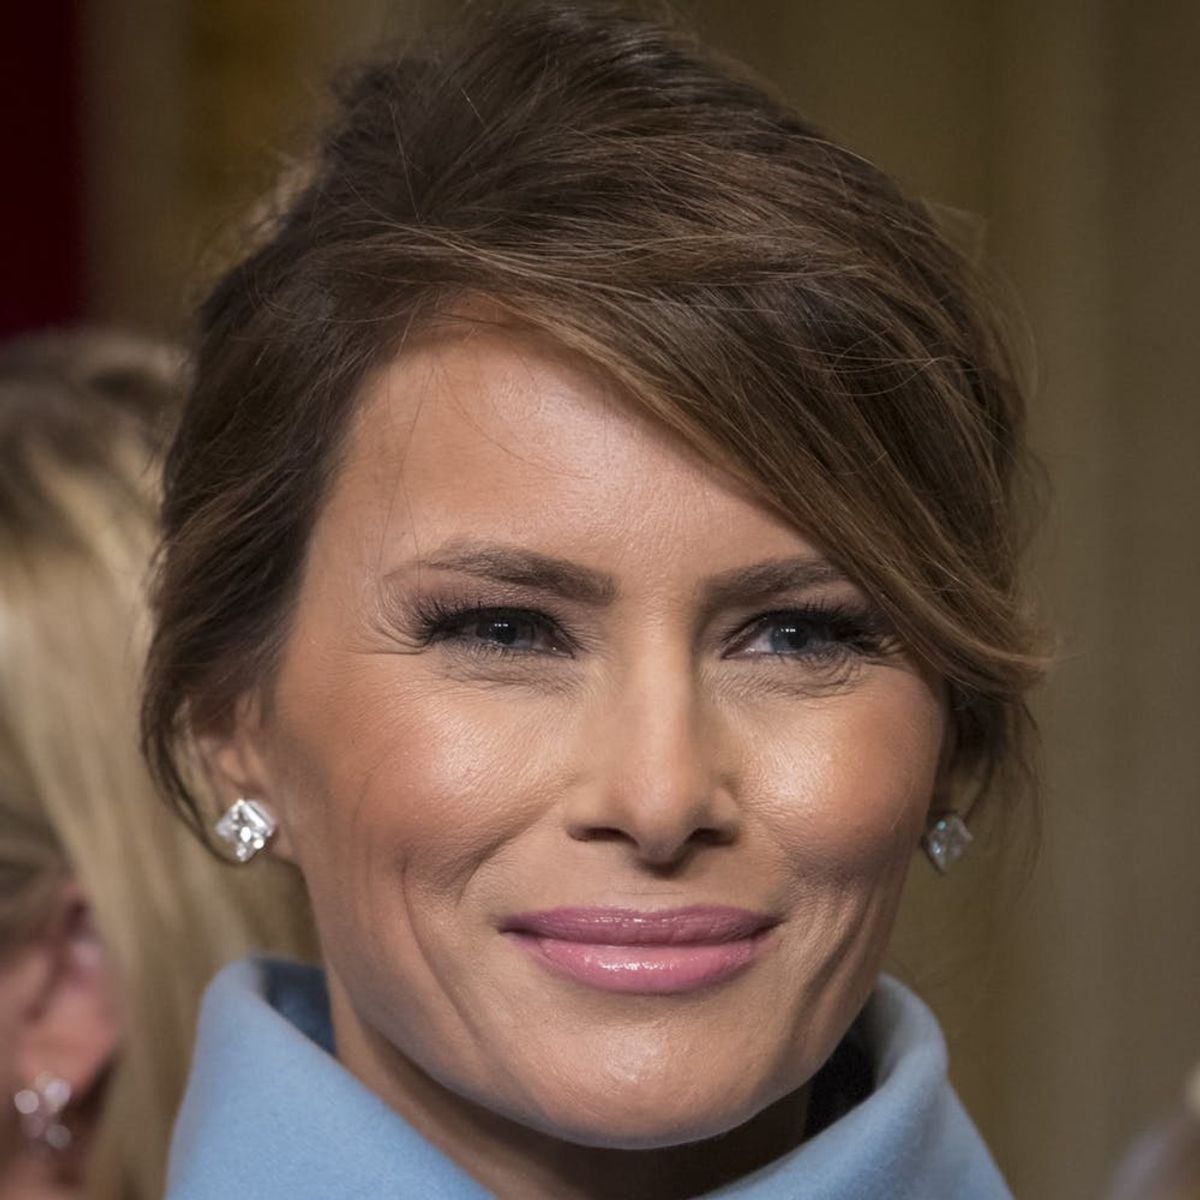 Melania Trump Helped Design Her Own Gown for Last Night’s Inaugural Ball